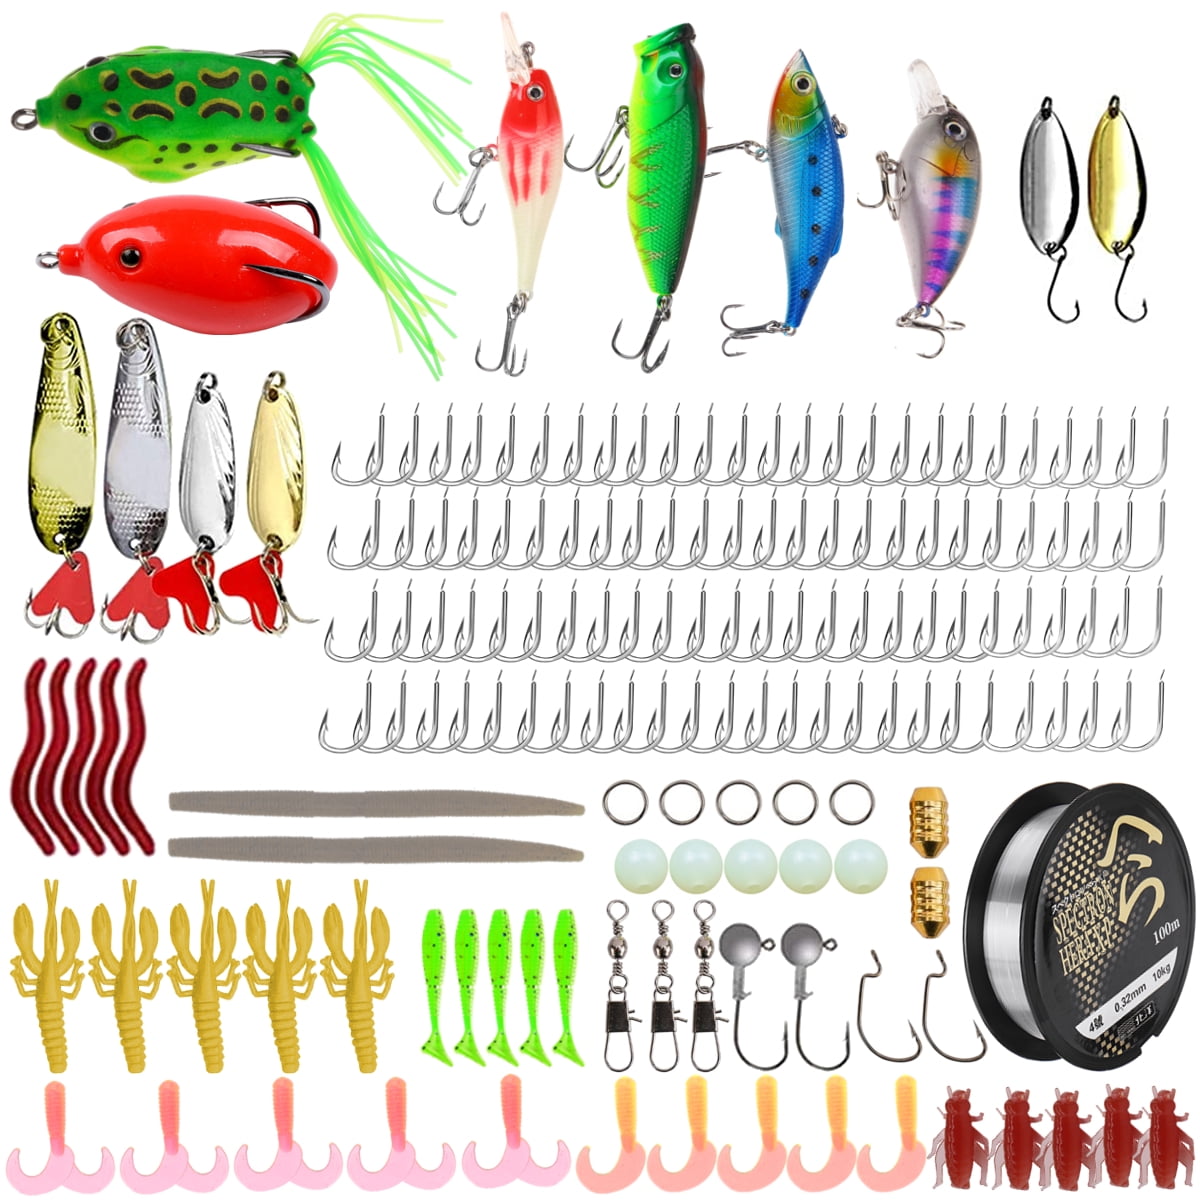 Aneew Fishing Accessories Bass Lures Freshwater Kit Gear Trout Spinnerbaits Spoon Swimbaits Tackle Box Pike Minnow Popper Soft Worms Gift 